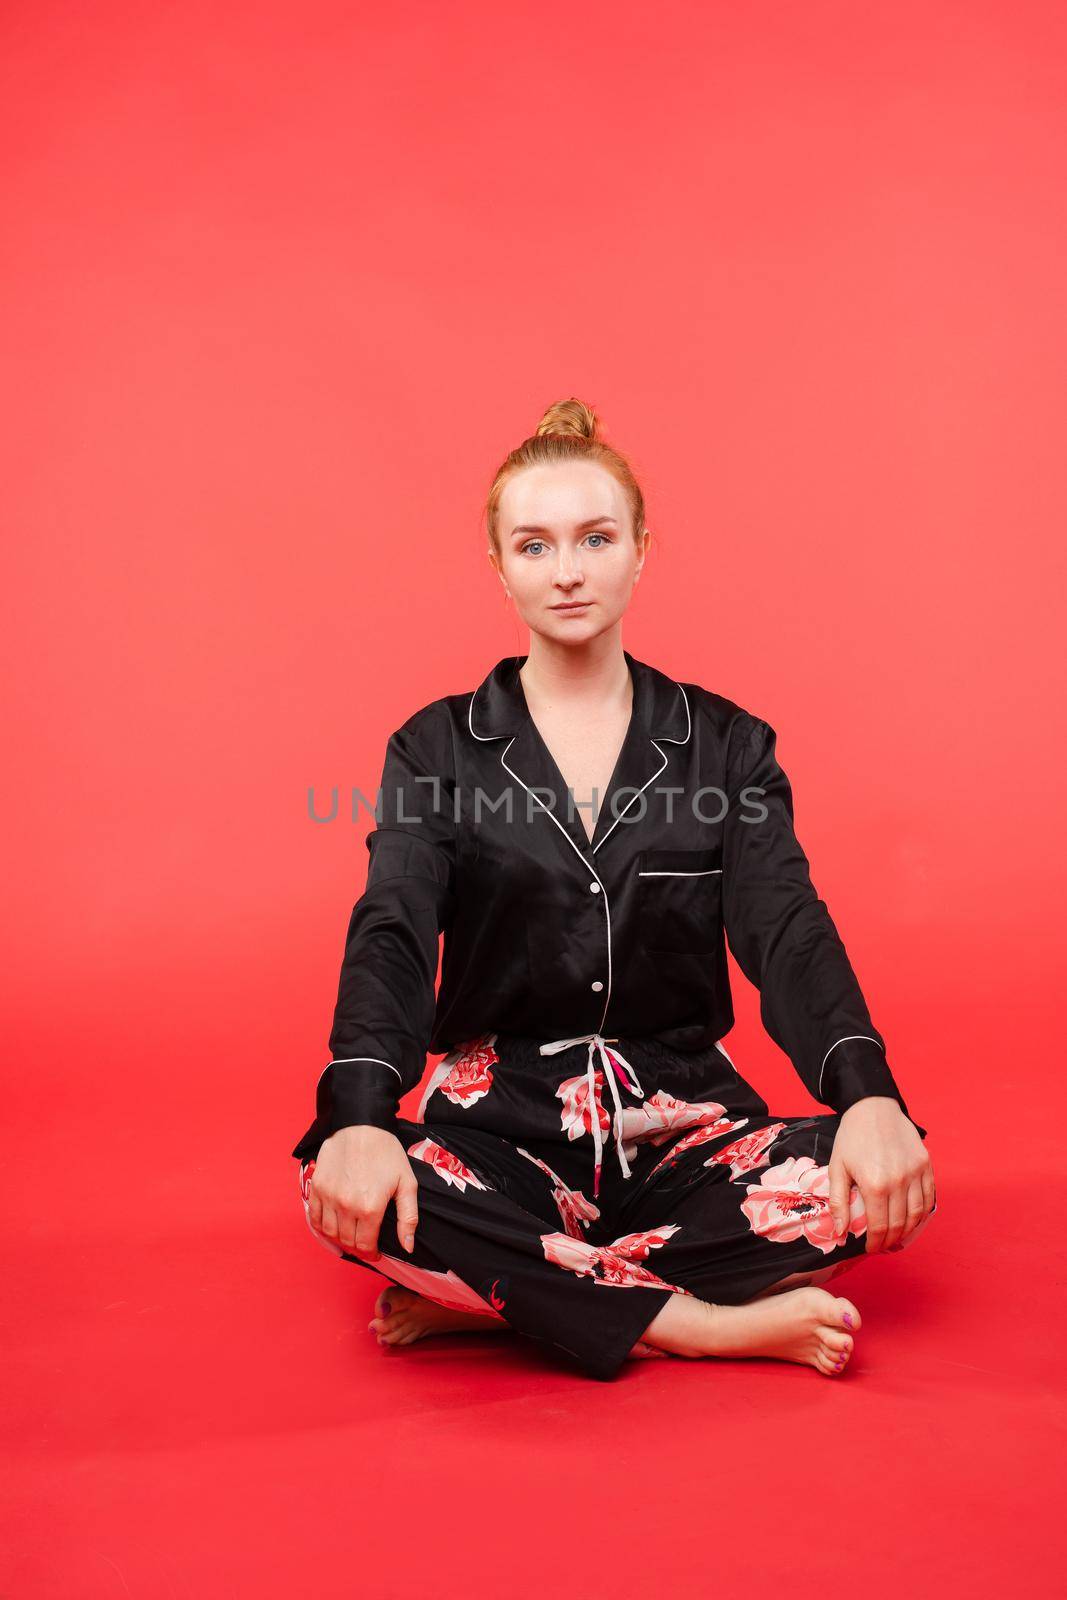 Young girl sitting on floor and meditating with closed eyes. by StudioLucky